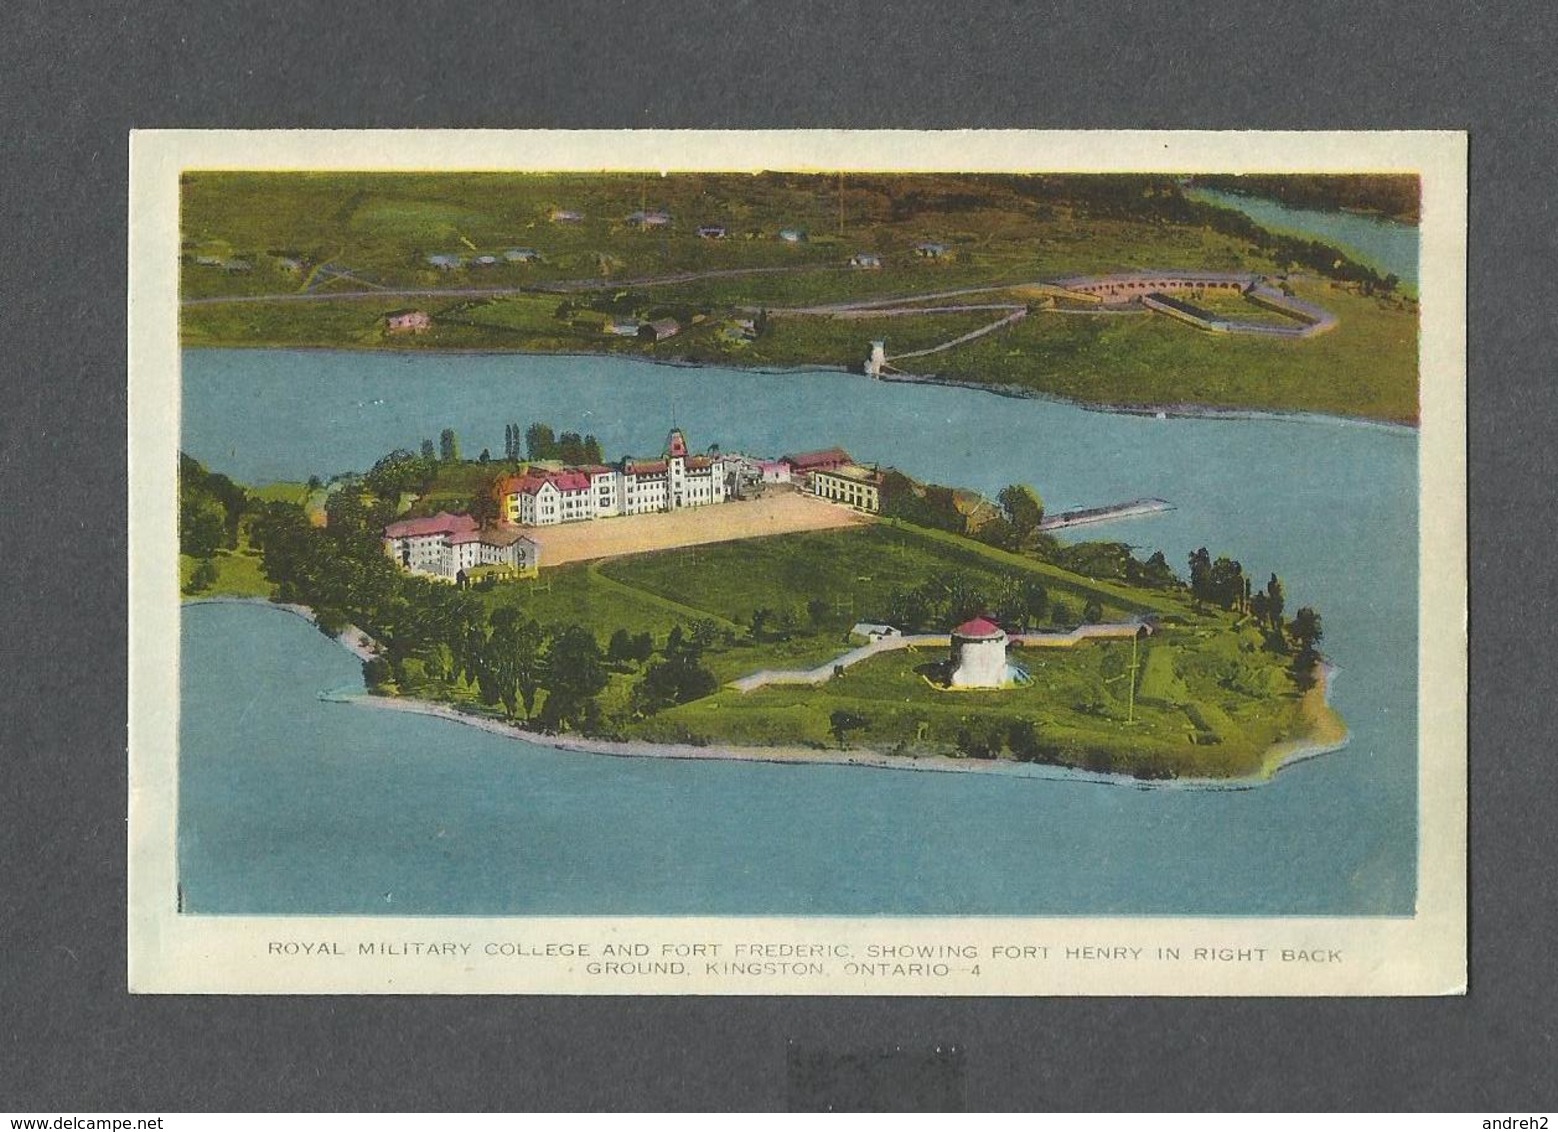 KINGSTON - ONTARIO - ROYAL MILITARY COLLEGE AND FORT FREDERIC SHOWING FORT HENRY - PHOTO -  BY PECO - Kingston